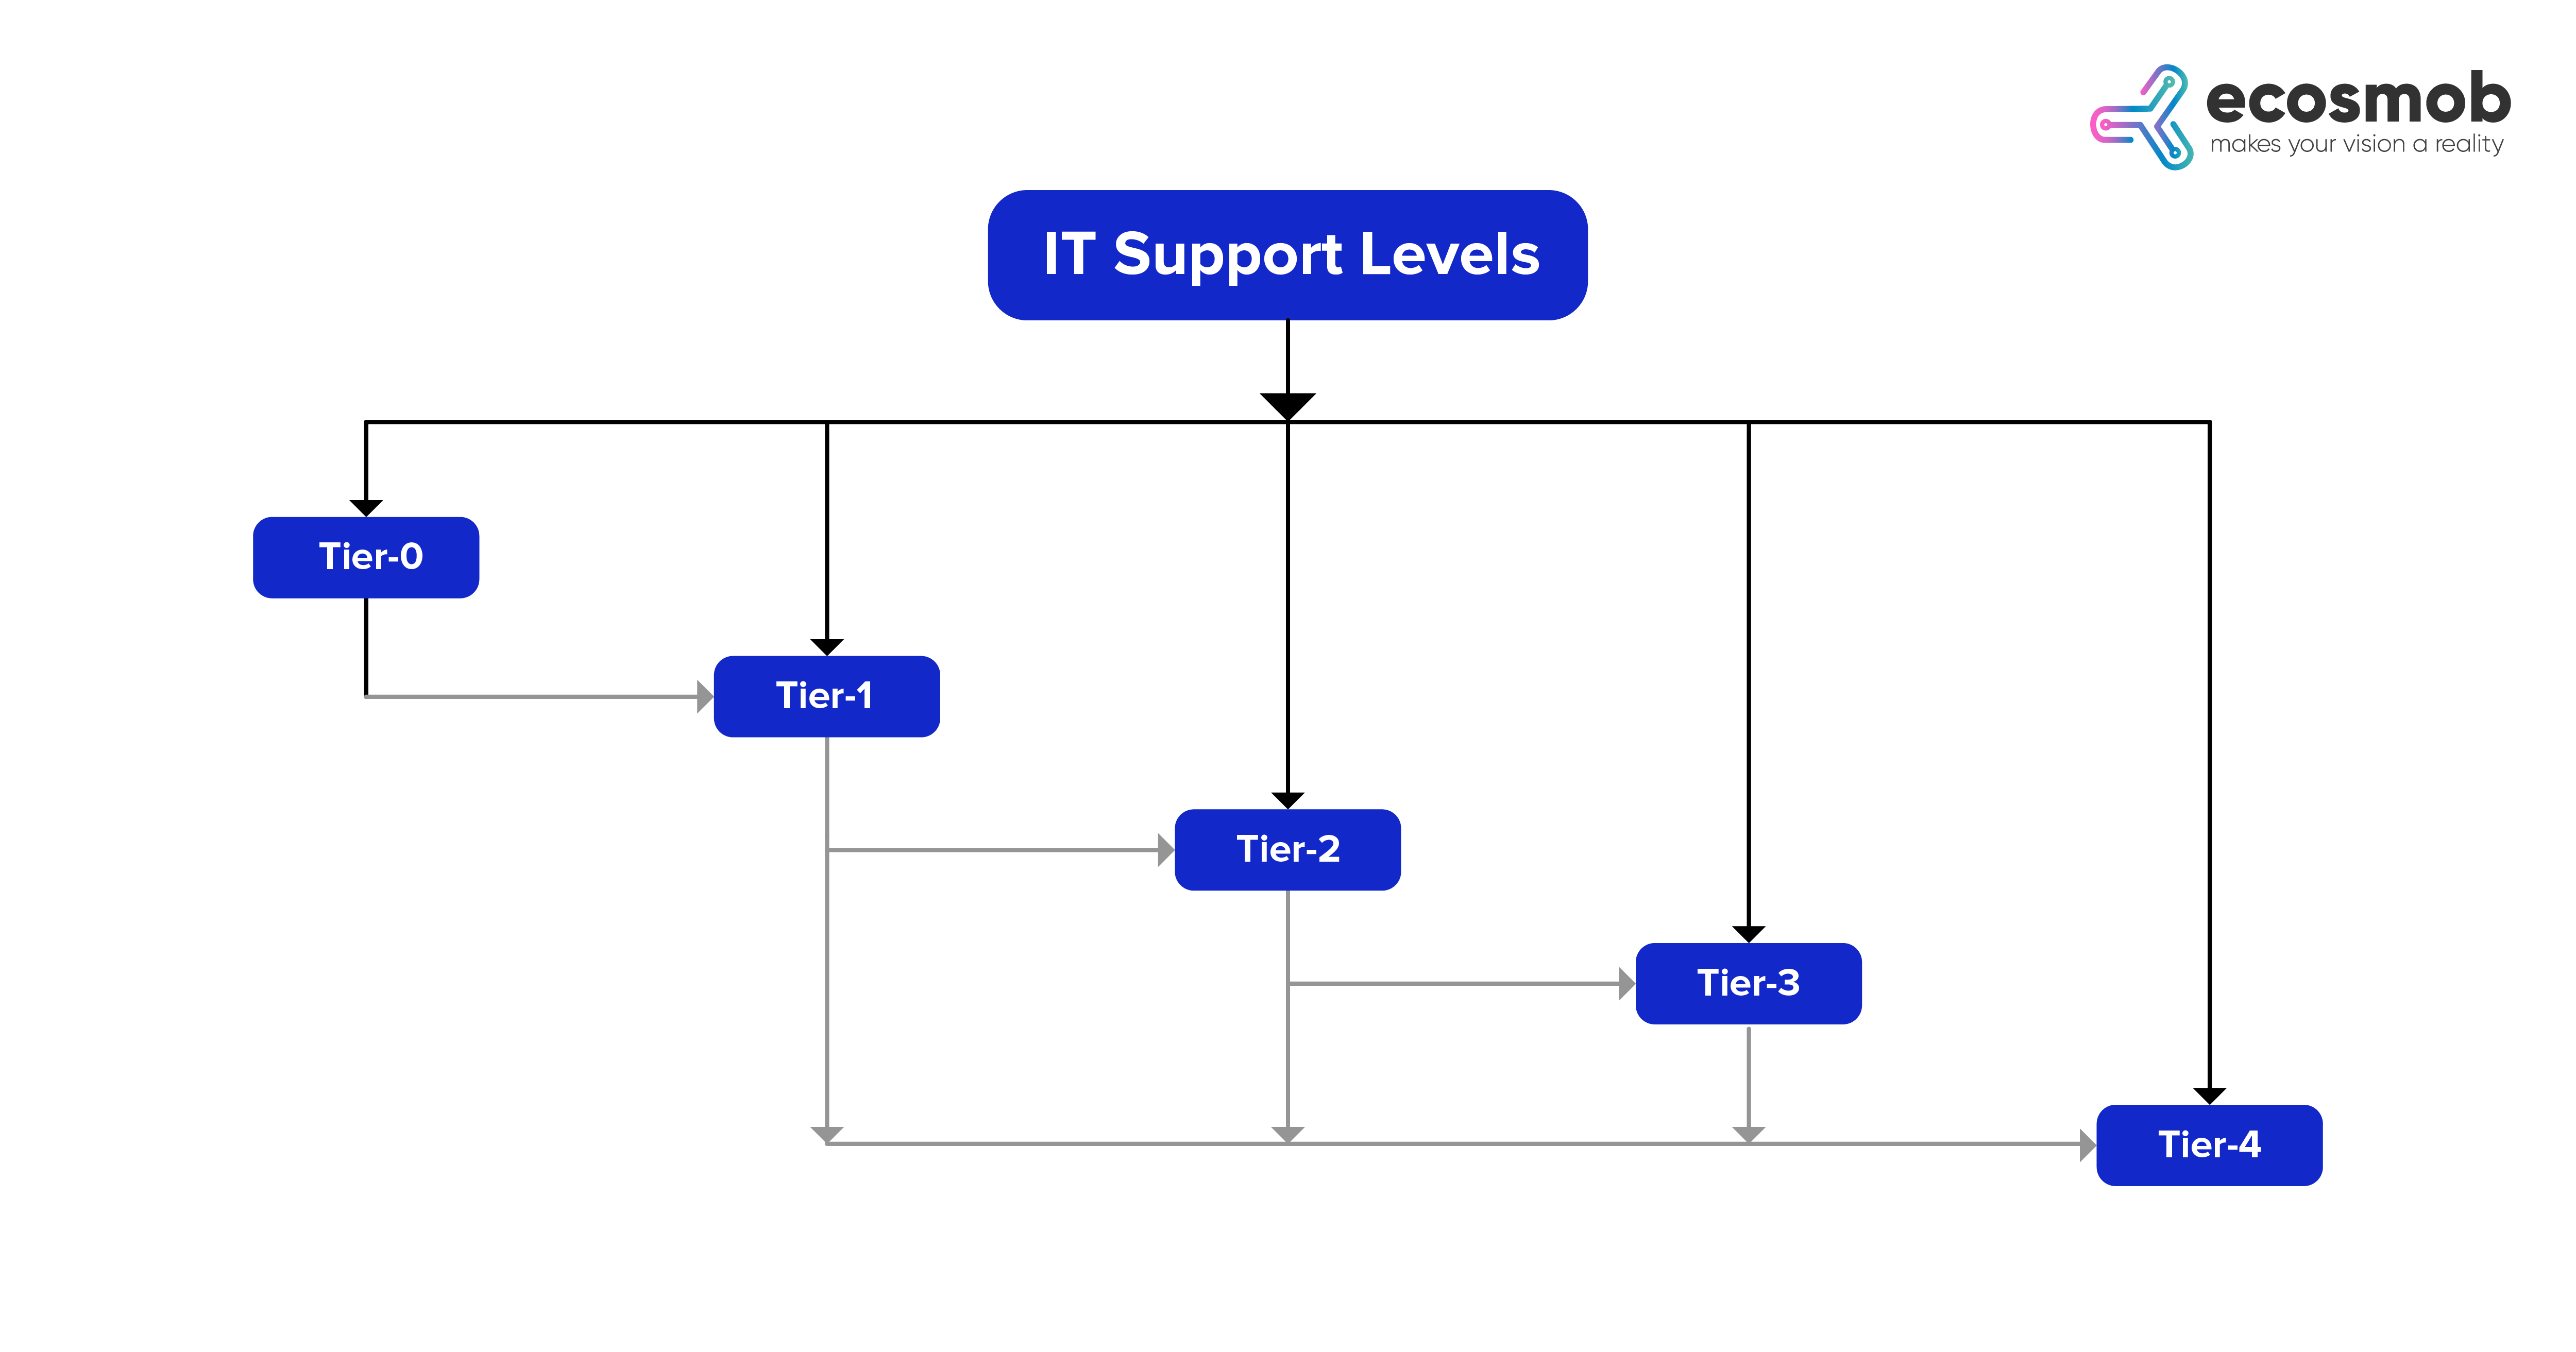 IT Support Levels